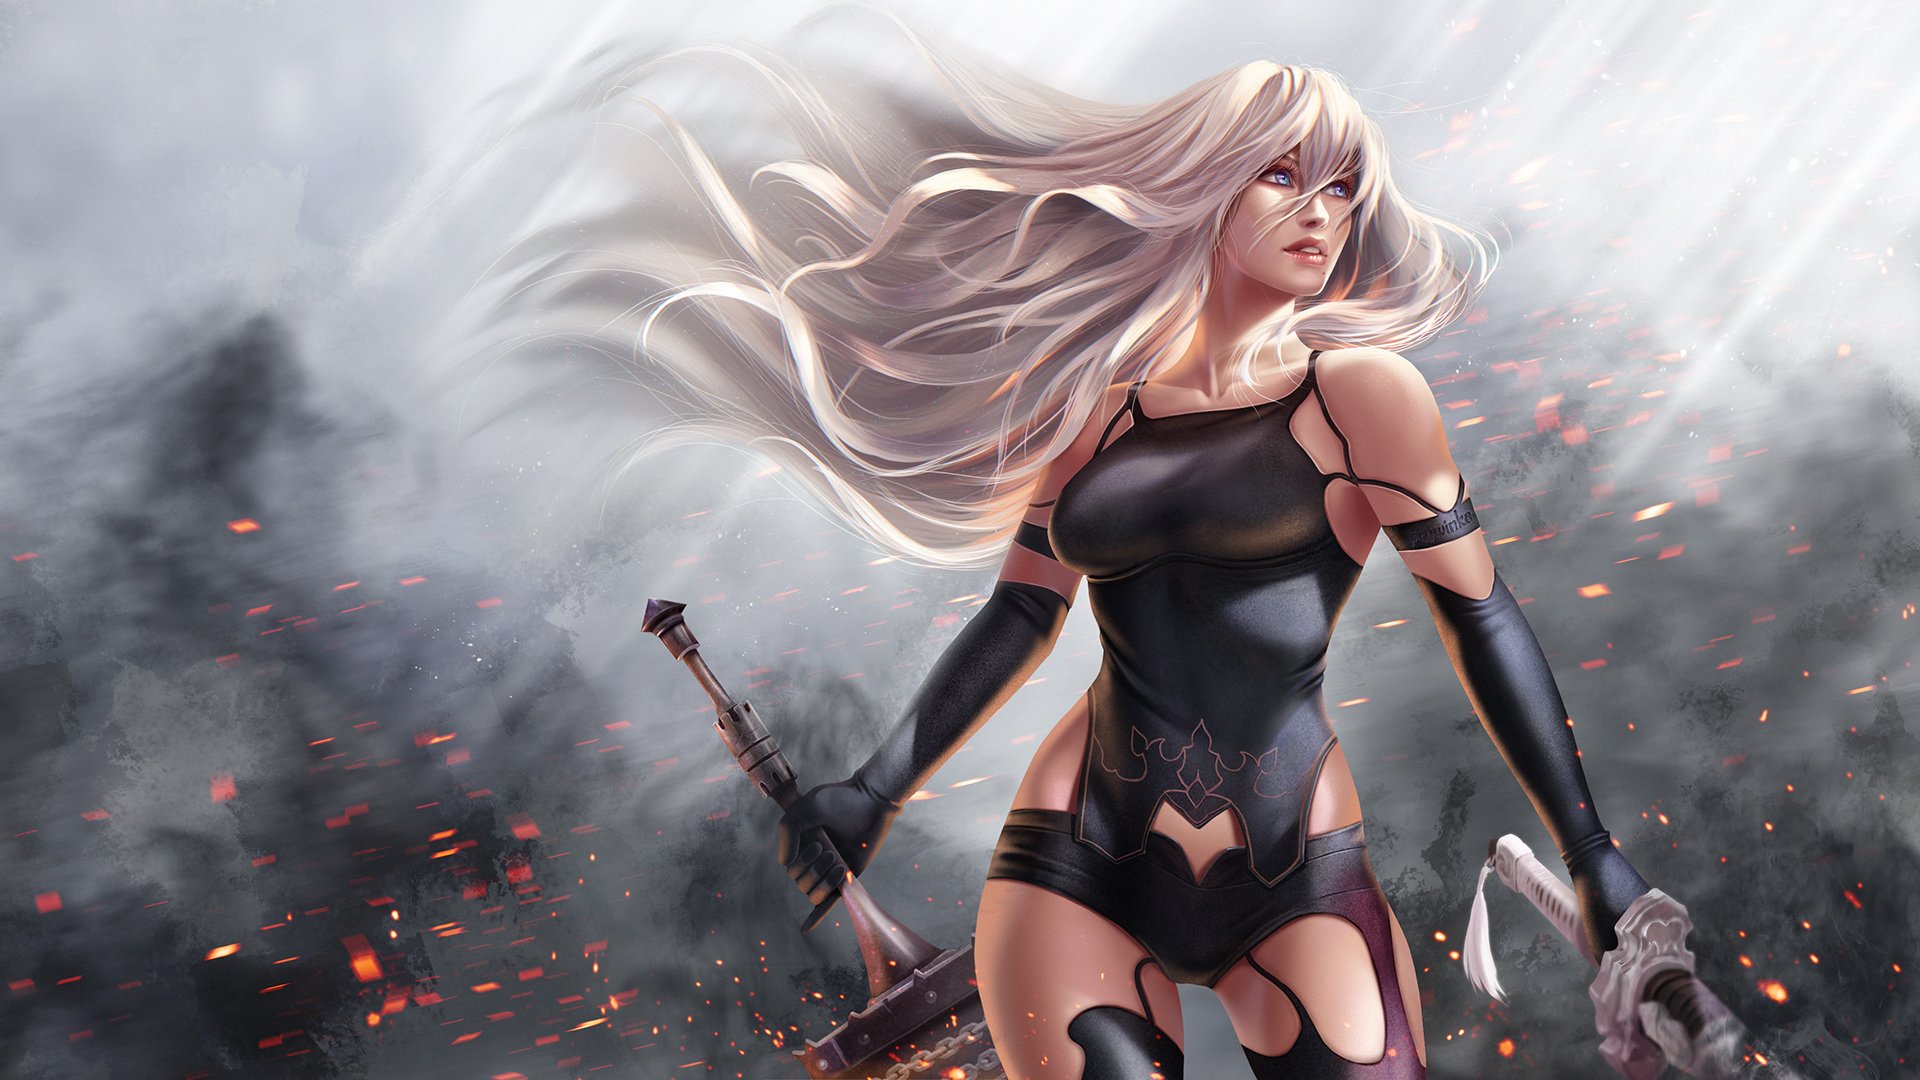 white hair, Blue eyes, Standing, Looking up, Long hair, A2 (Nier: Automata), Video games, Fan art, Sword, Nier: Automata, Gloves, NieR, Sparks, Sun rays, Human android, Weapon, Fantasy weapon, Dust, Smoke, Wind, Mole Wallpaper